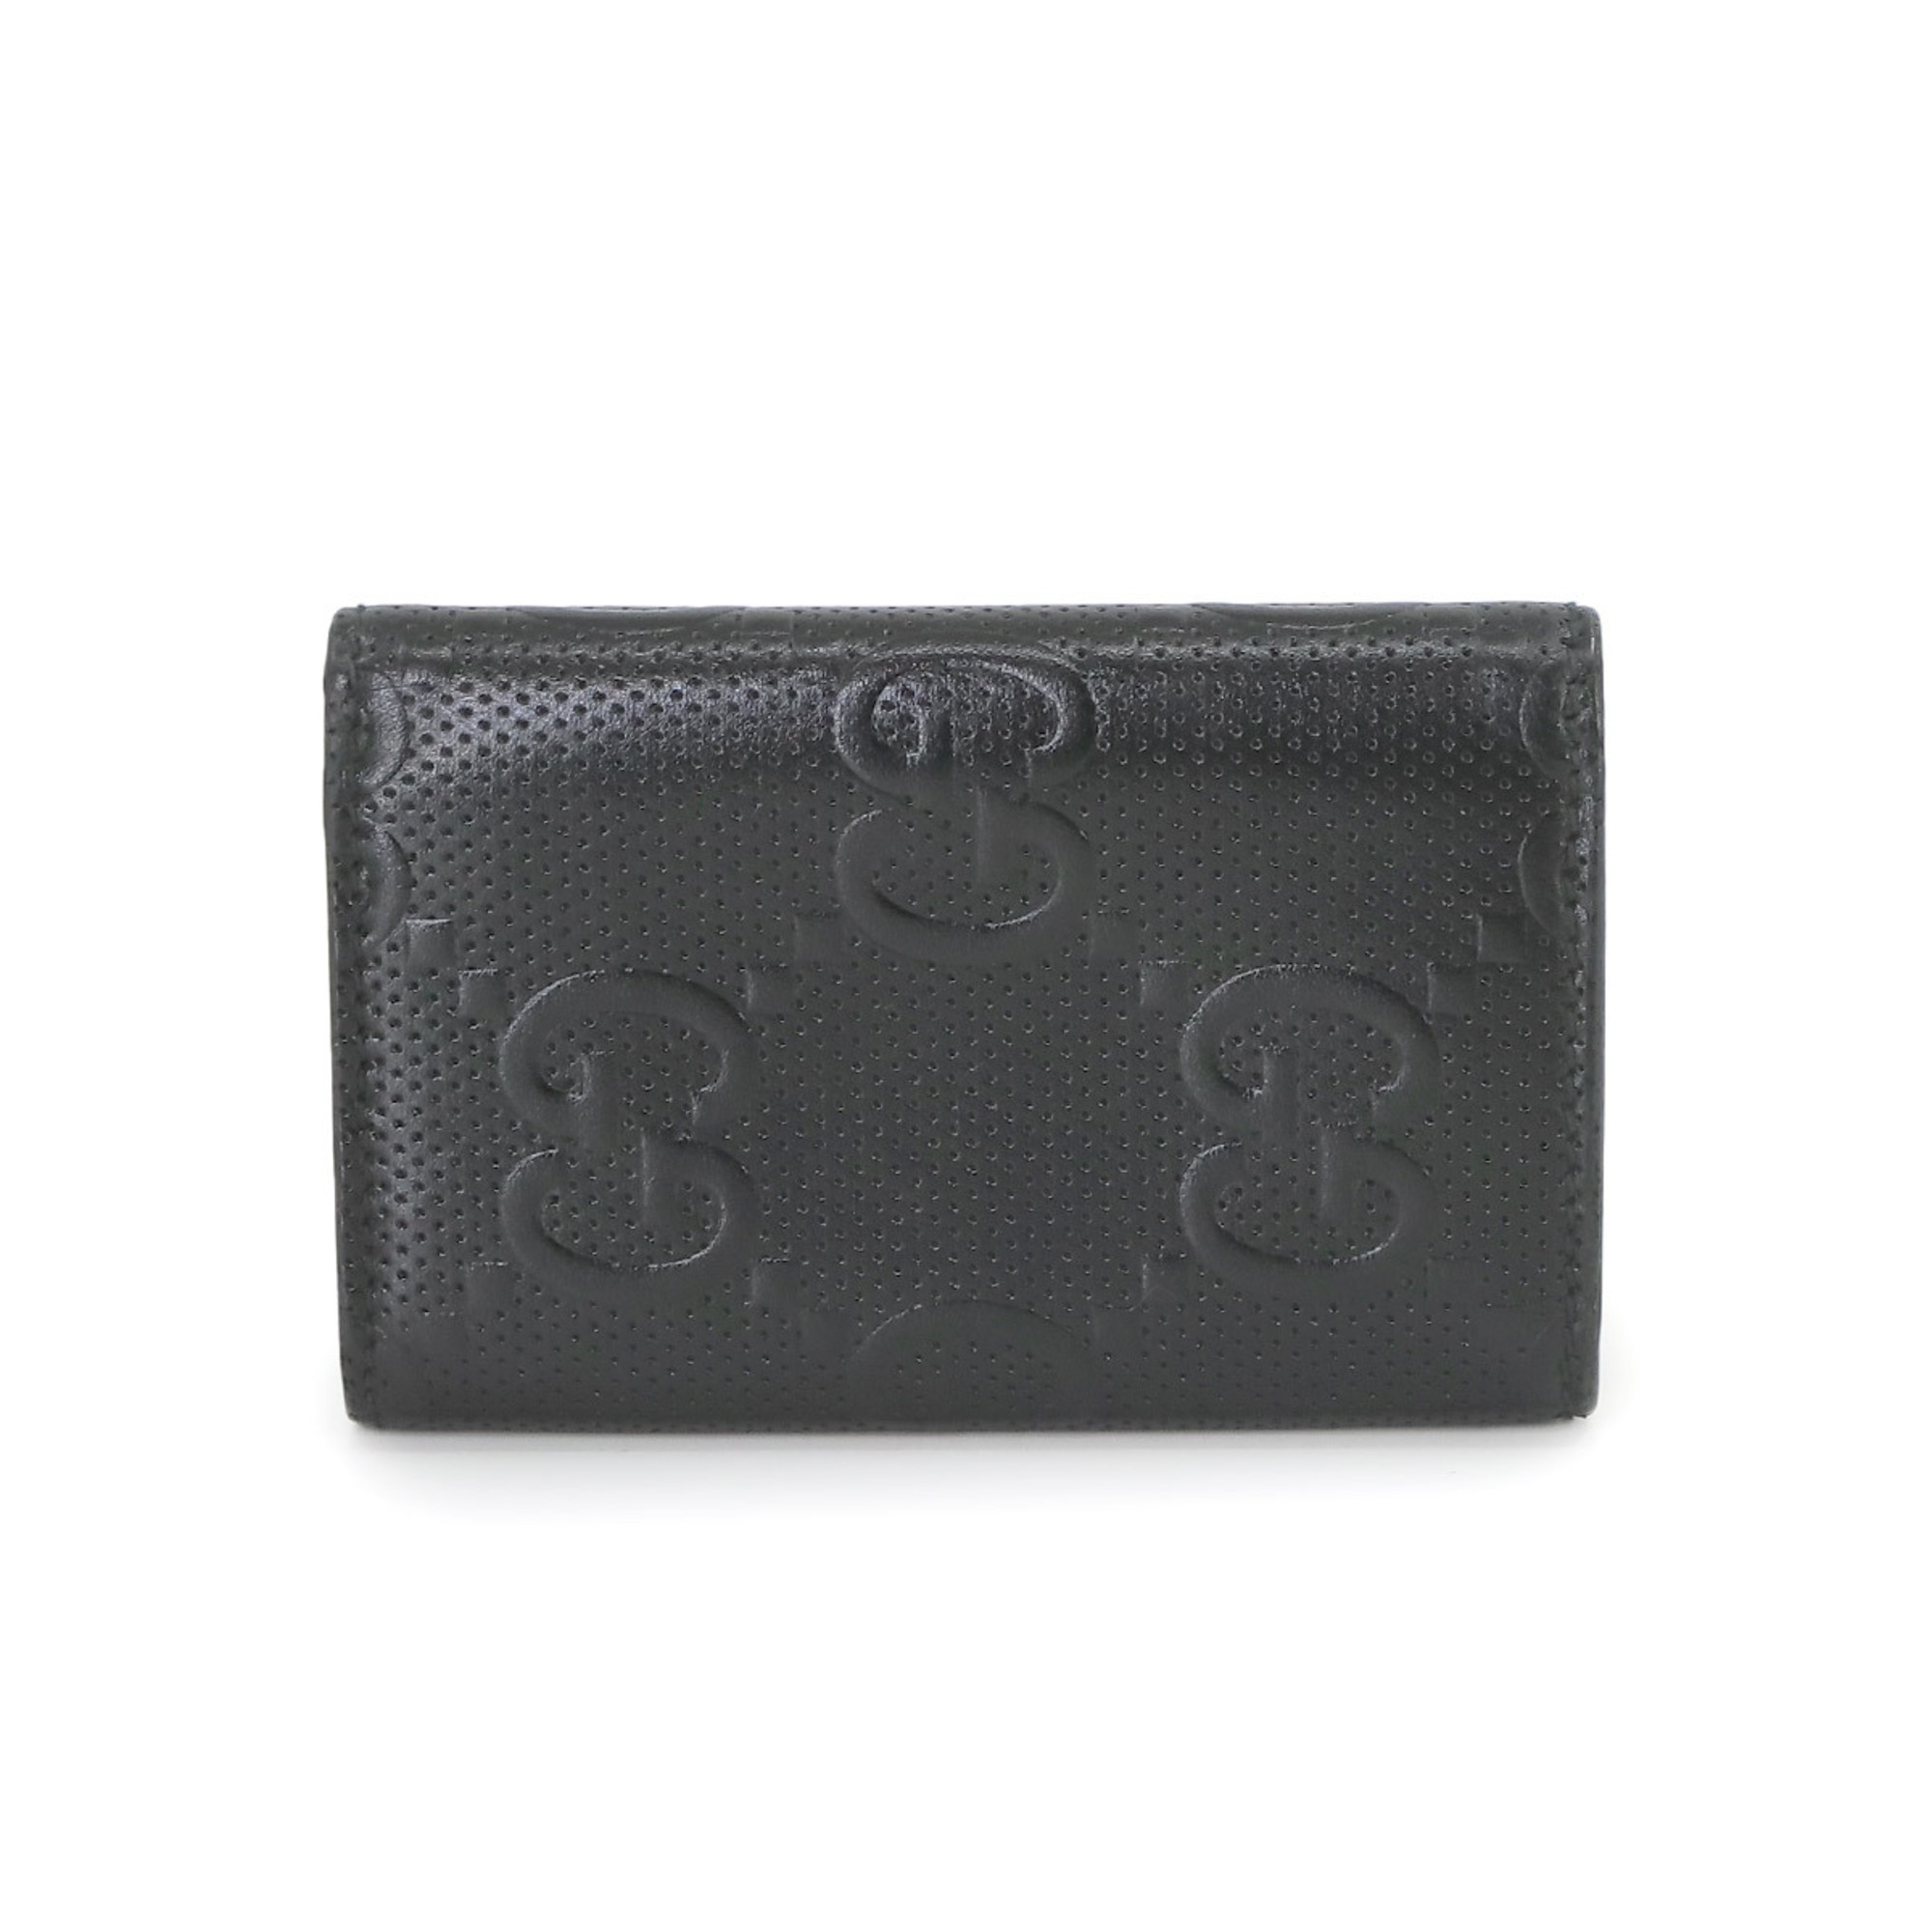 GUCCI GG embossed 6-ring key case leather black 625565 silver hardware Key Case